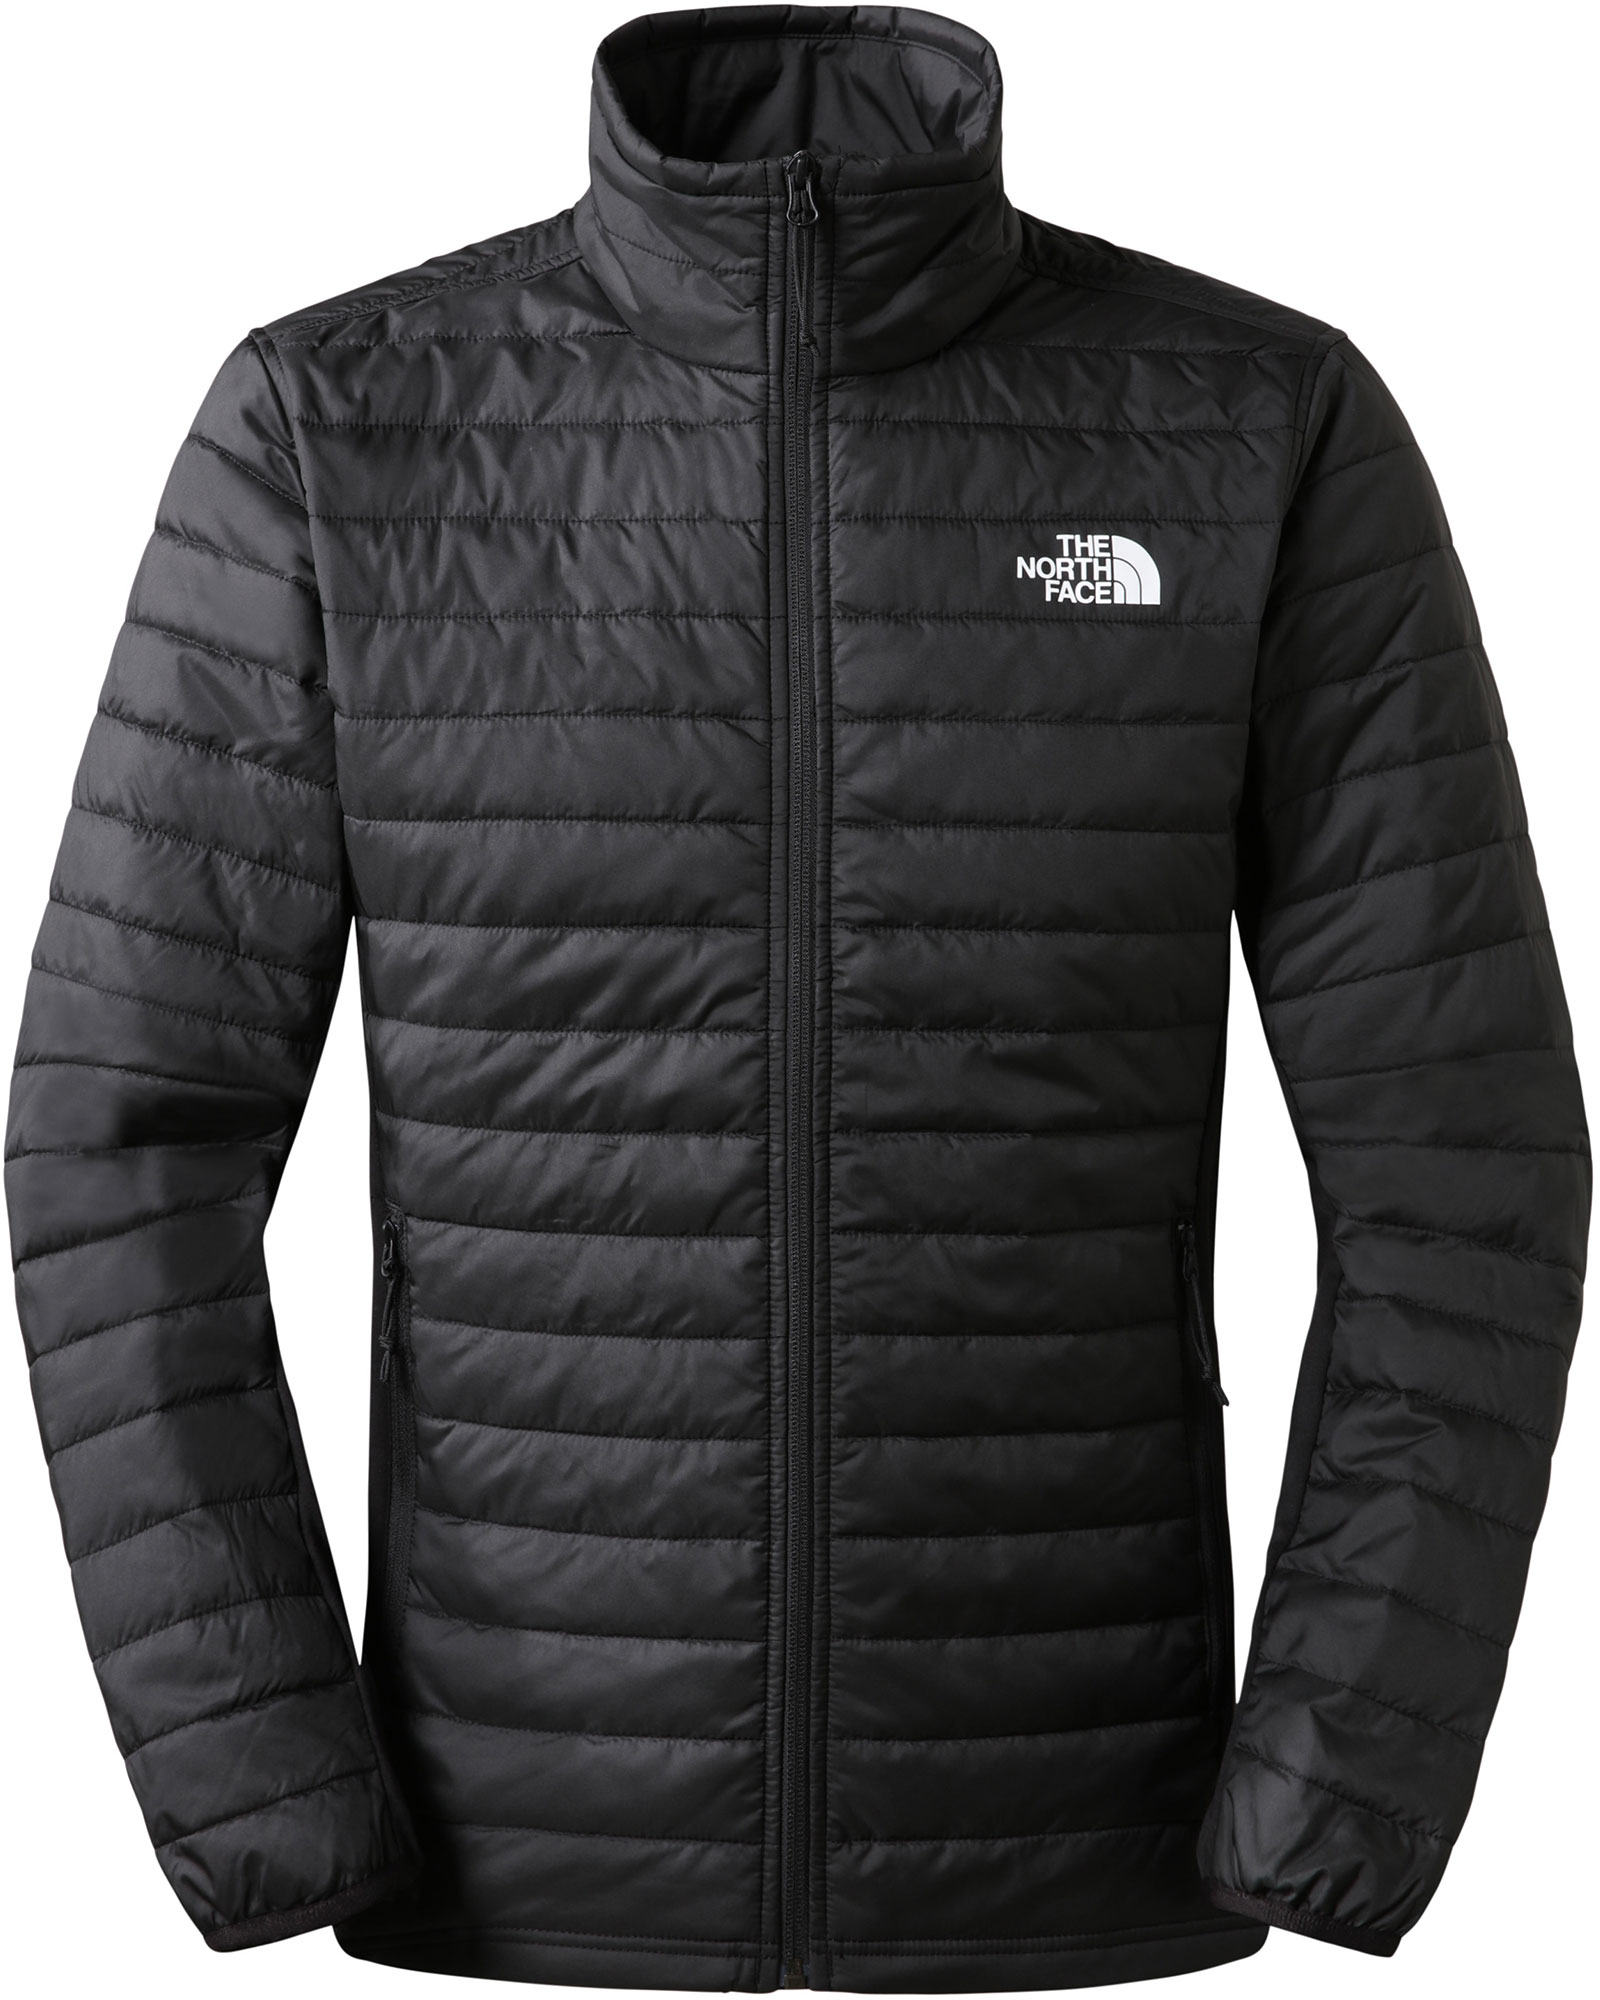 The North Face Canyonlands Hybrid Men’s Insulated Jacket - TNF Black XL